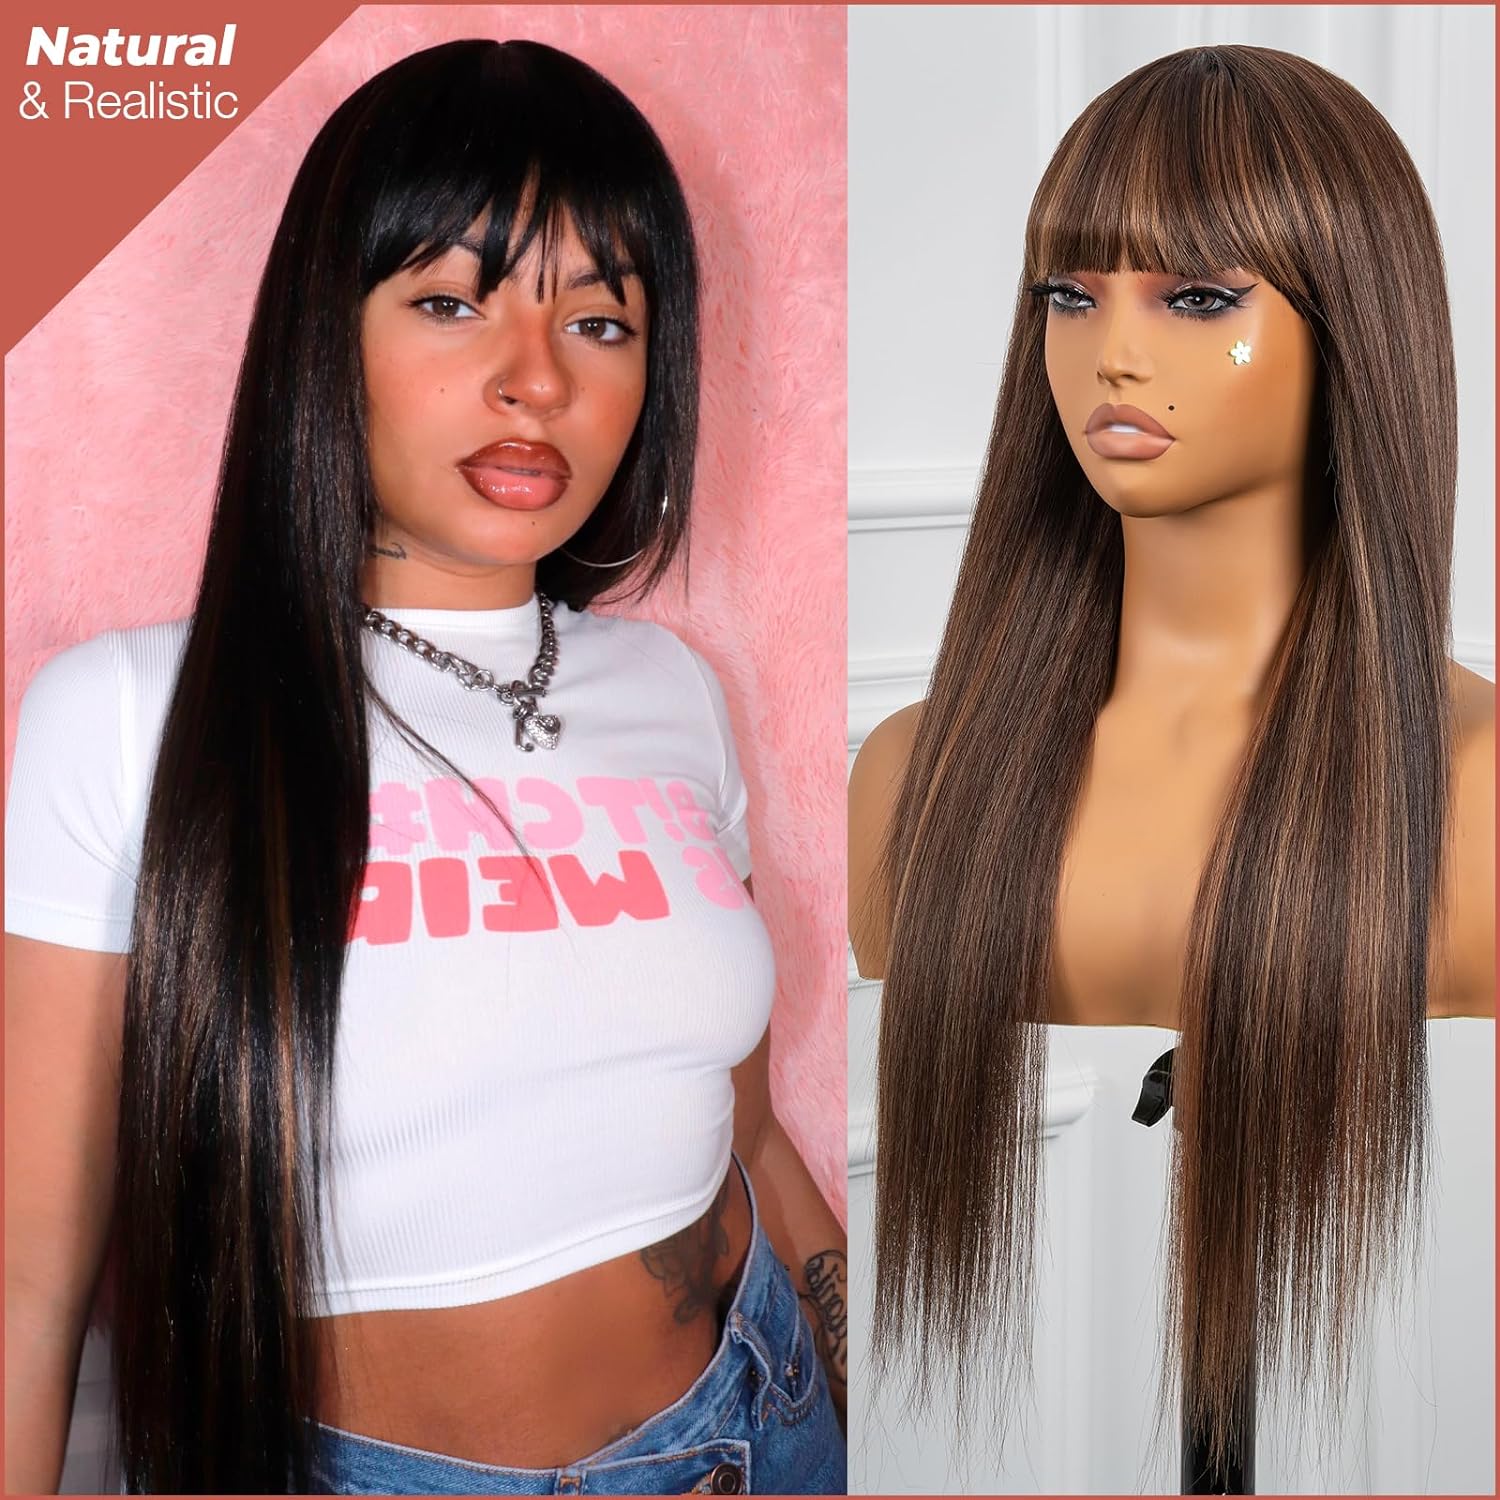 FAST SHIPPING 3-5 DAY Airy Wig | ToyoTress Airy Short Straight Bob Lace Front Wigs - Natural Black Middle Part Wigs For Women, Light Yaki Synthetic Pre-plucked Glueless Wig Heat Resistant For Daily Party